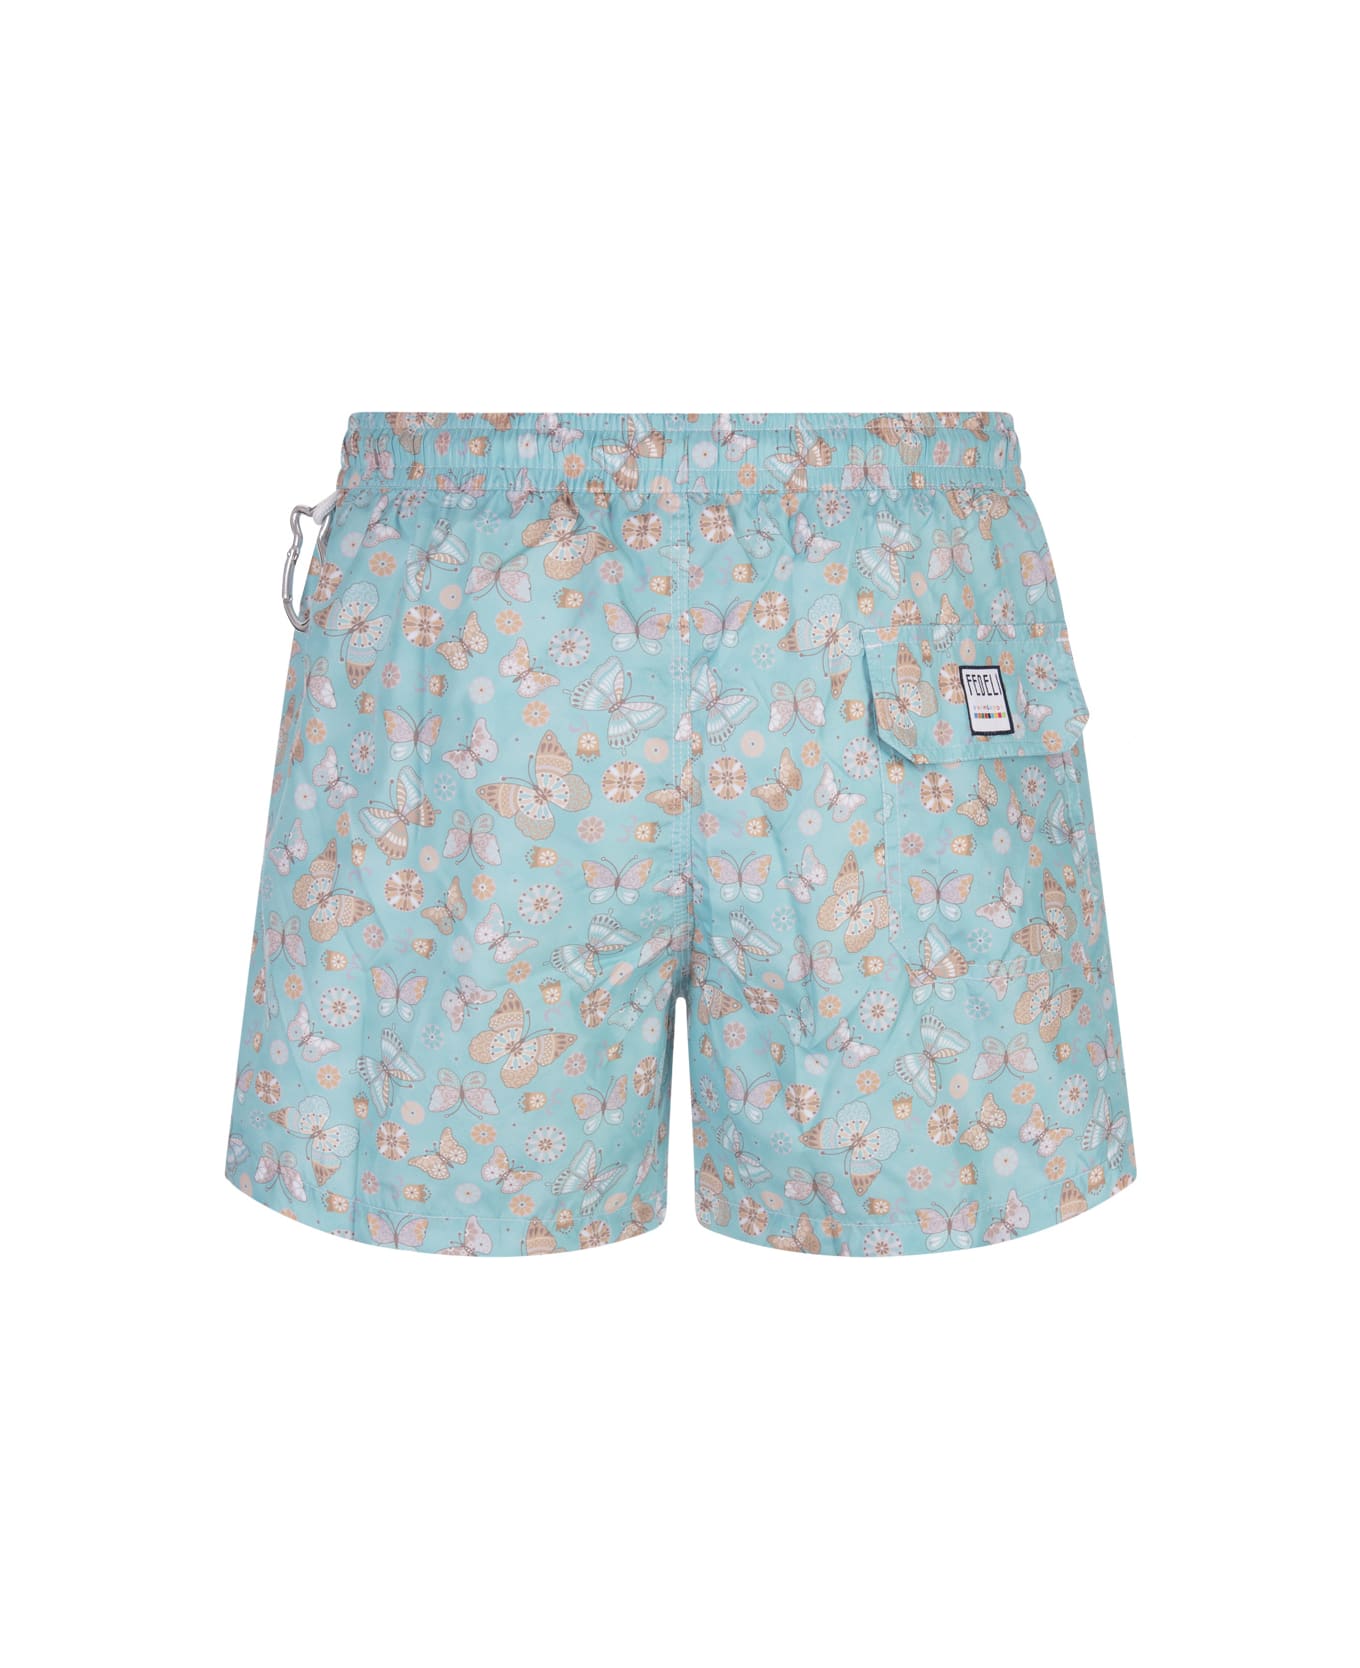 Fedeli Light Blue Swim Shorts With Butterfly Print - Blue